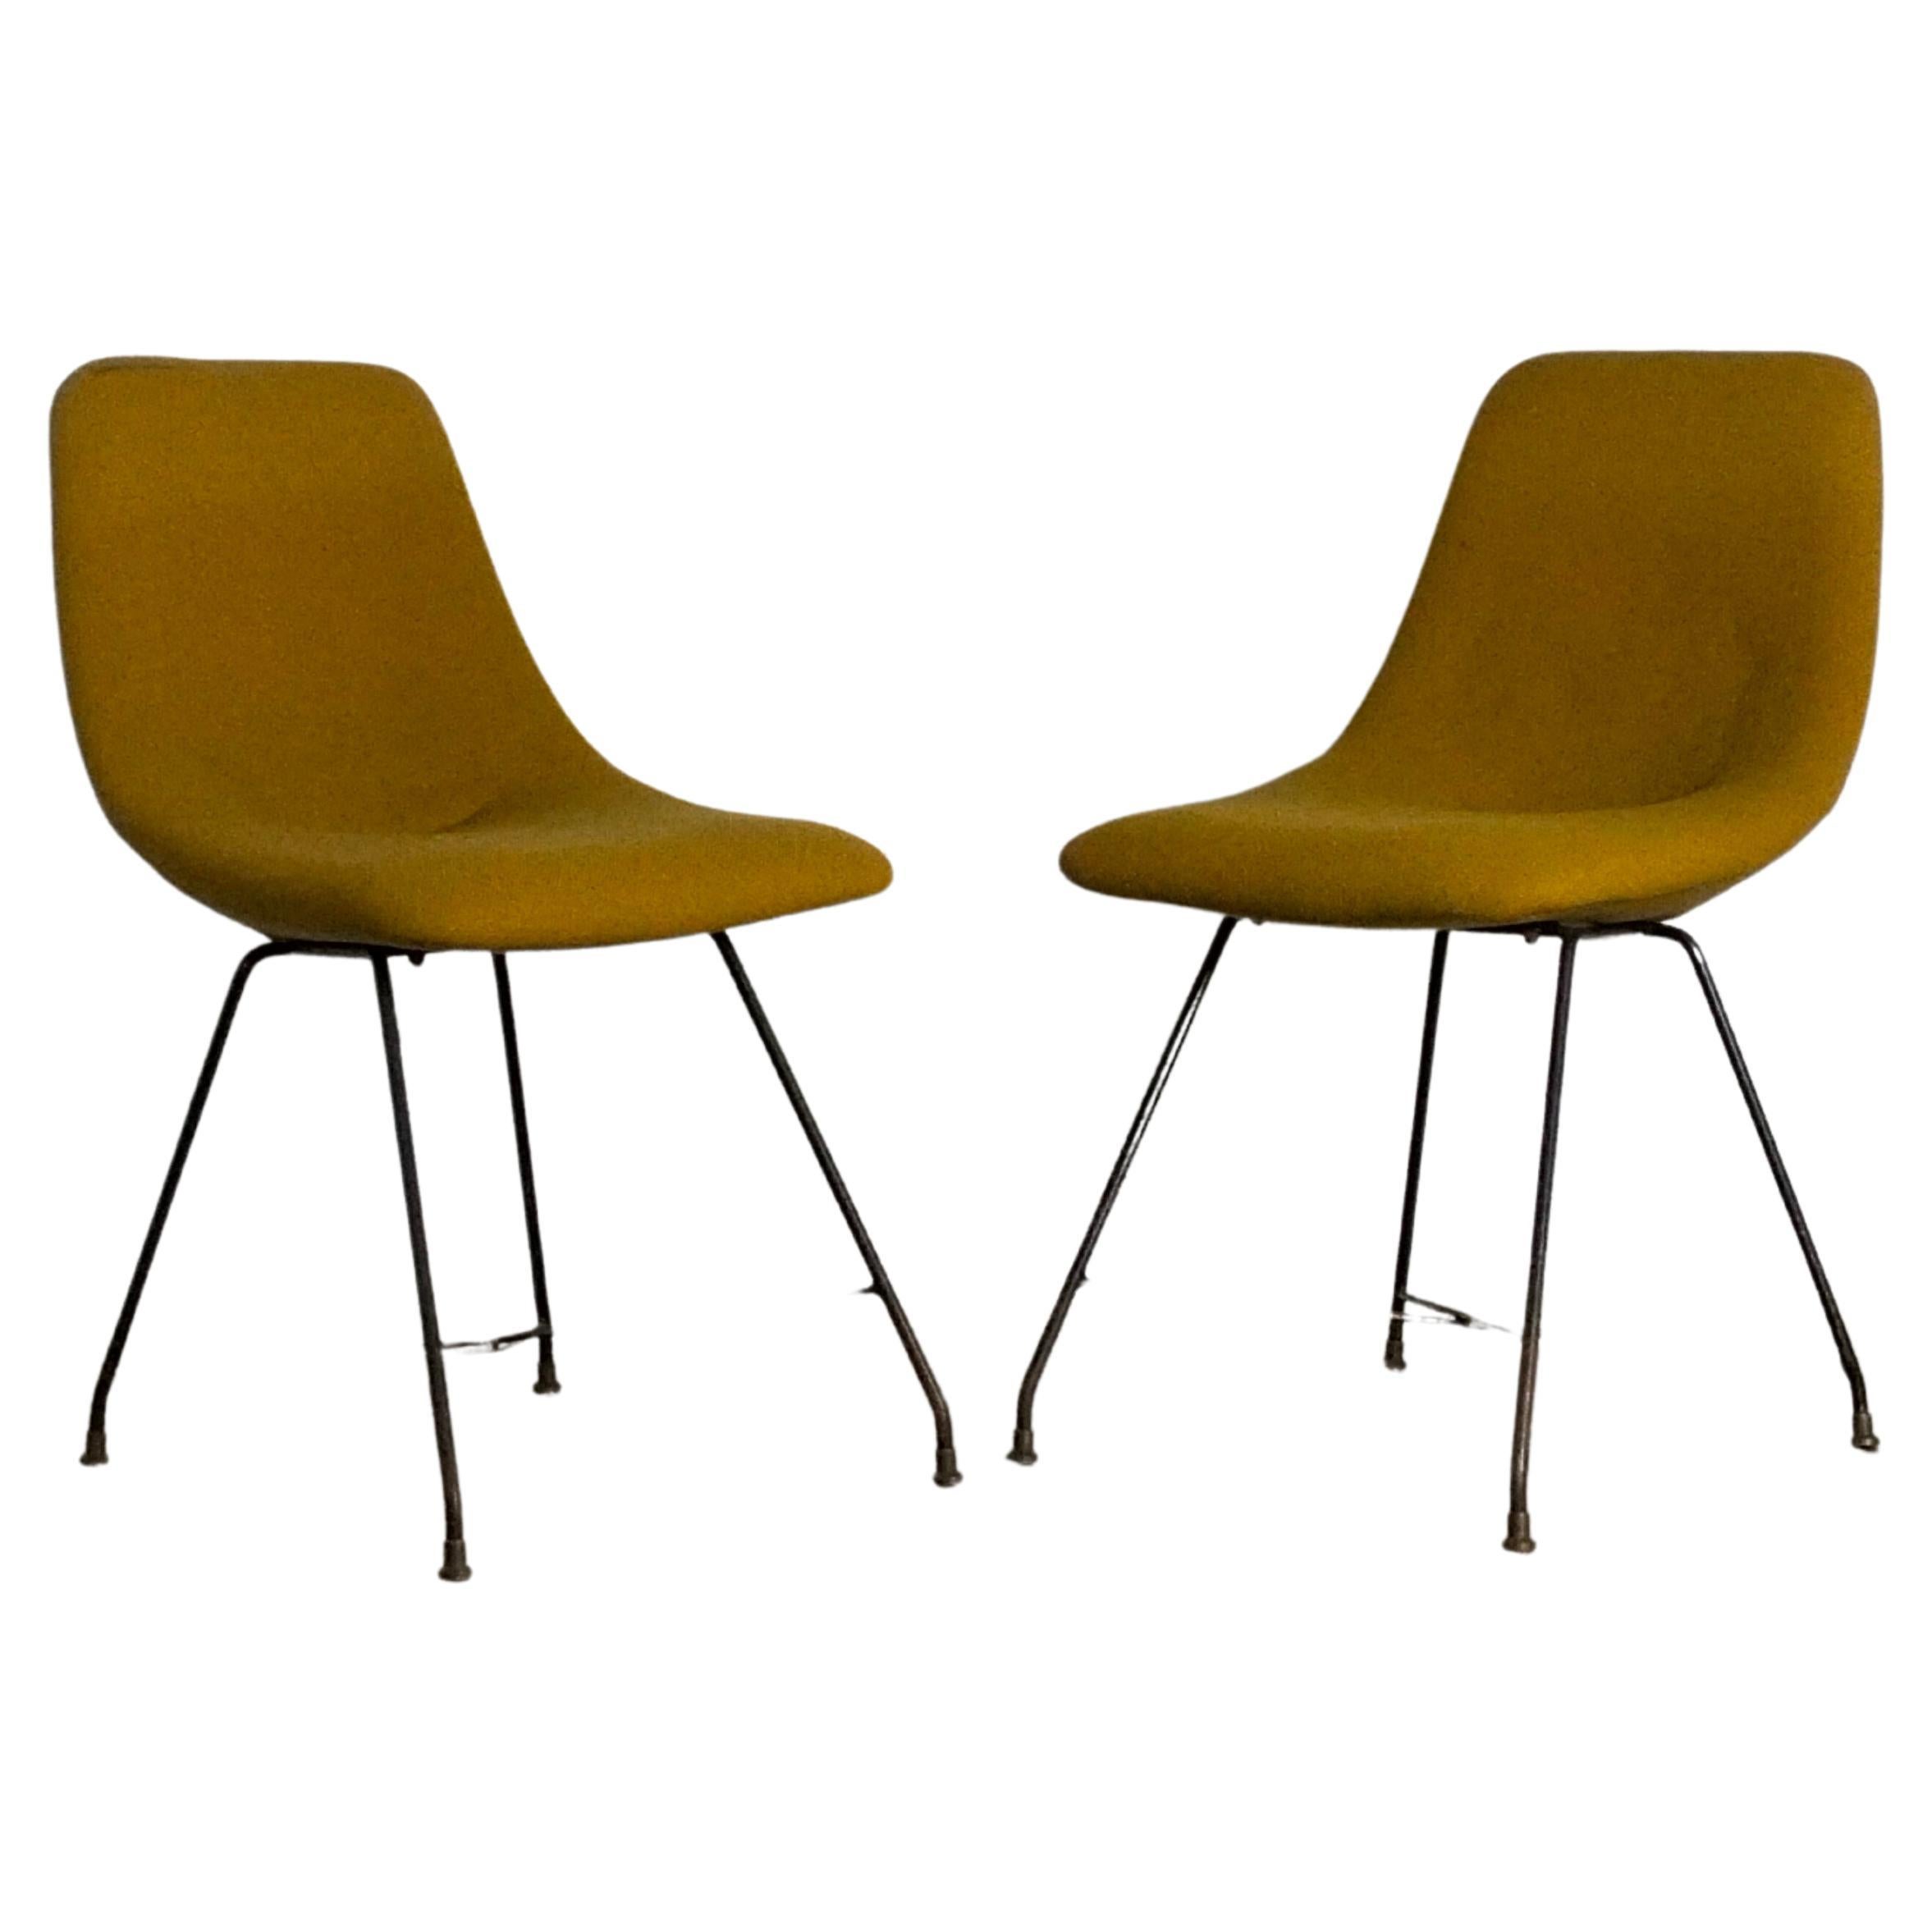 Set of 2 Aster Chairs by Augusto Bozzi for Saporiti, ‘50'60 For Sale